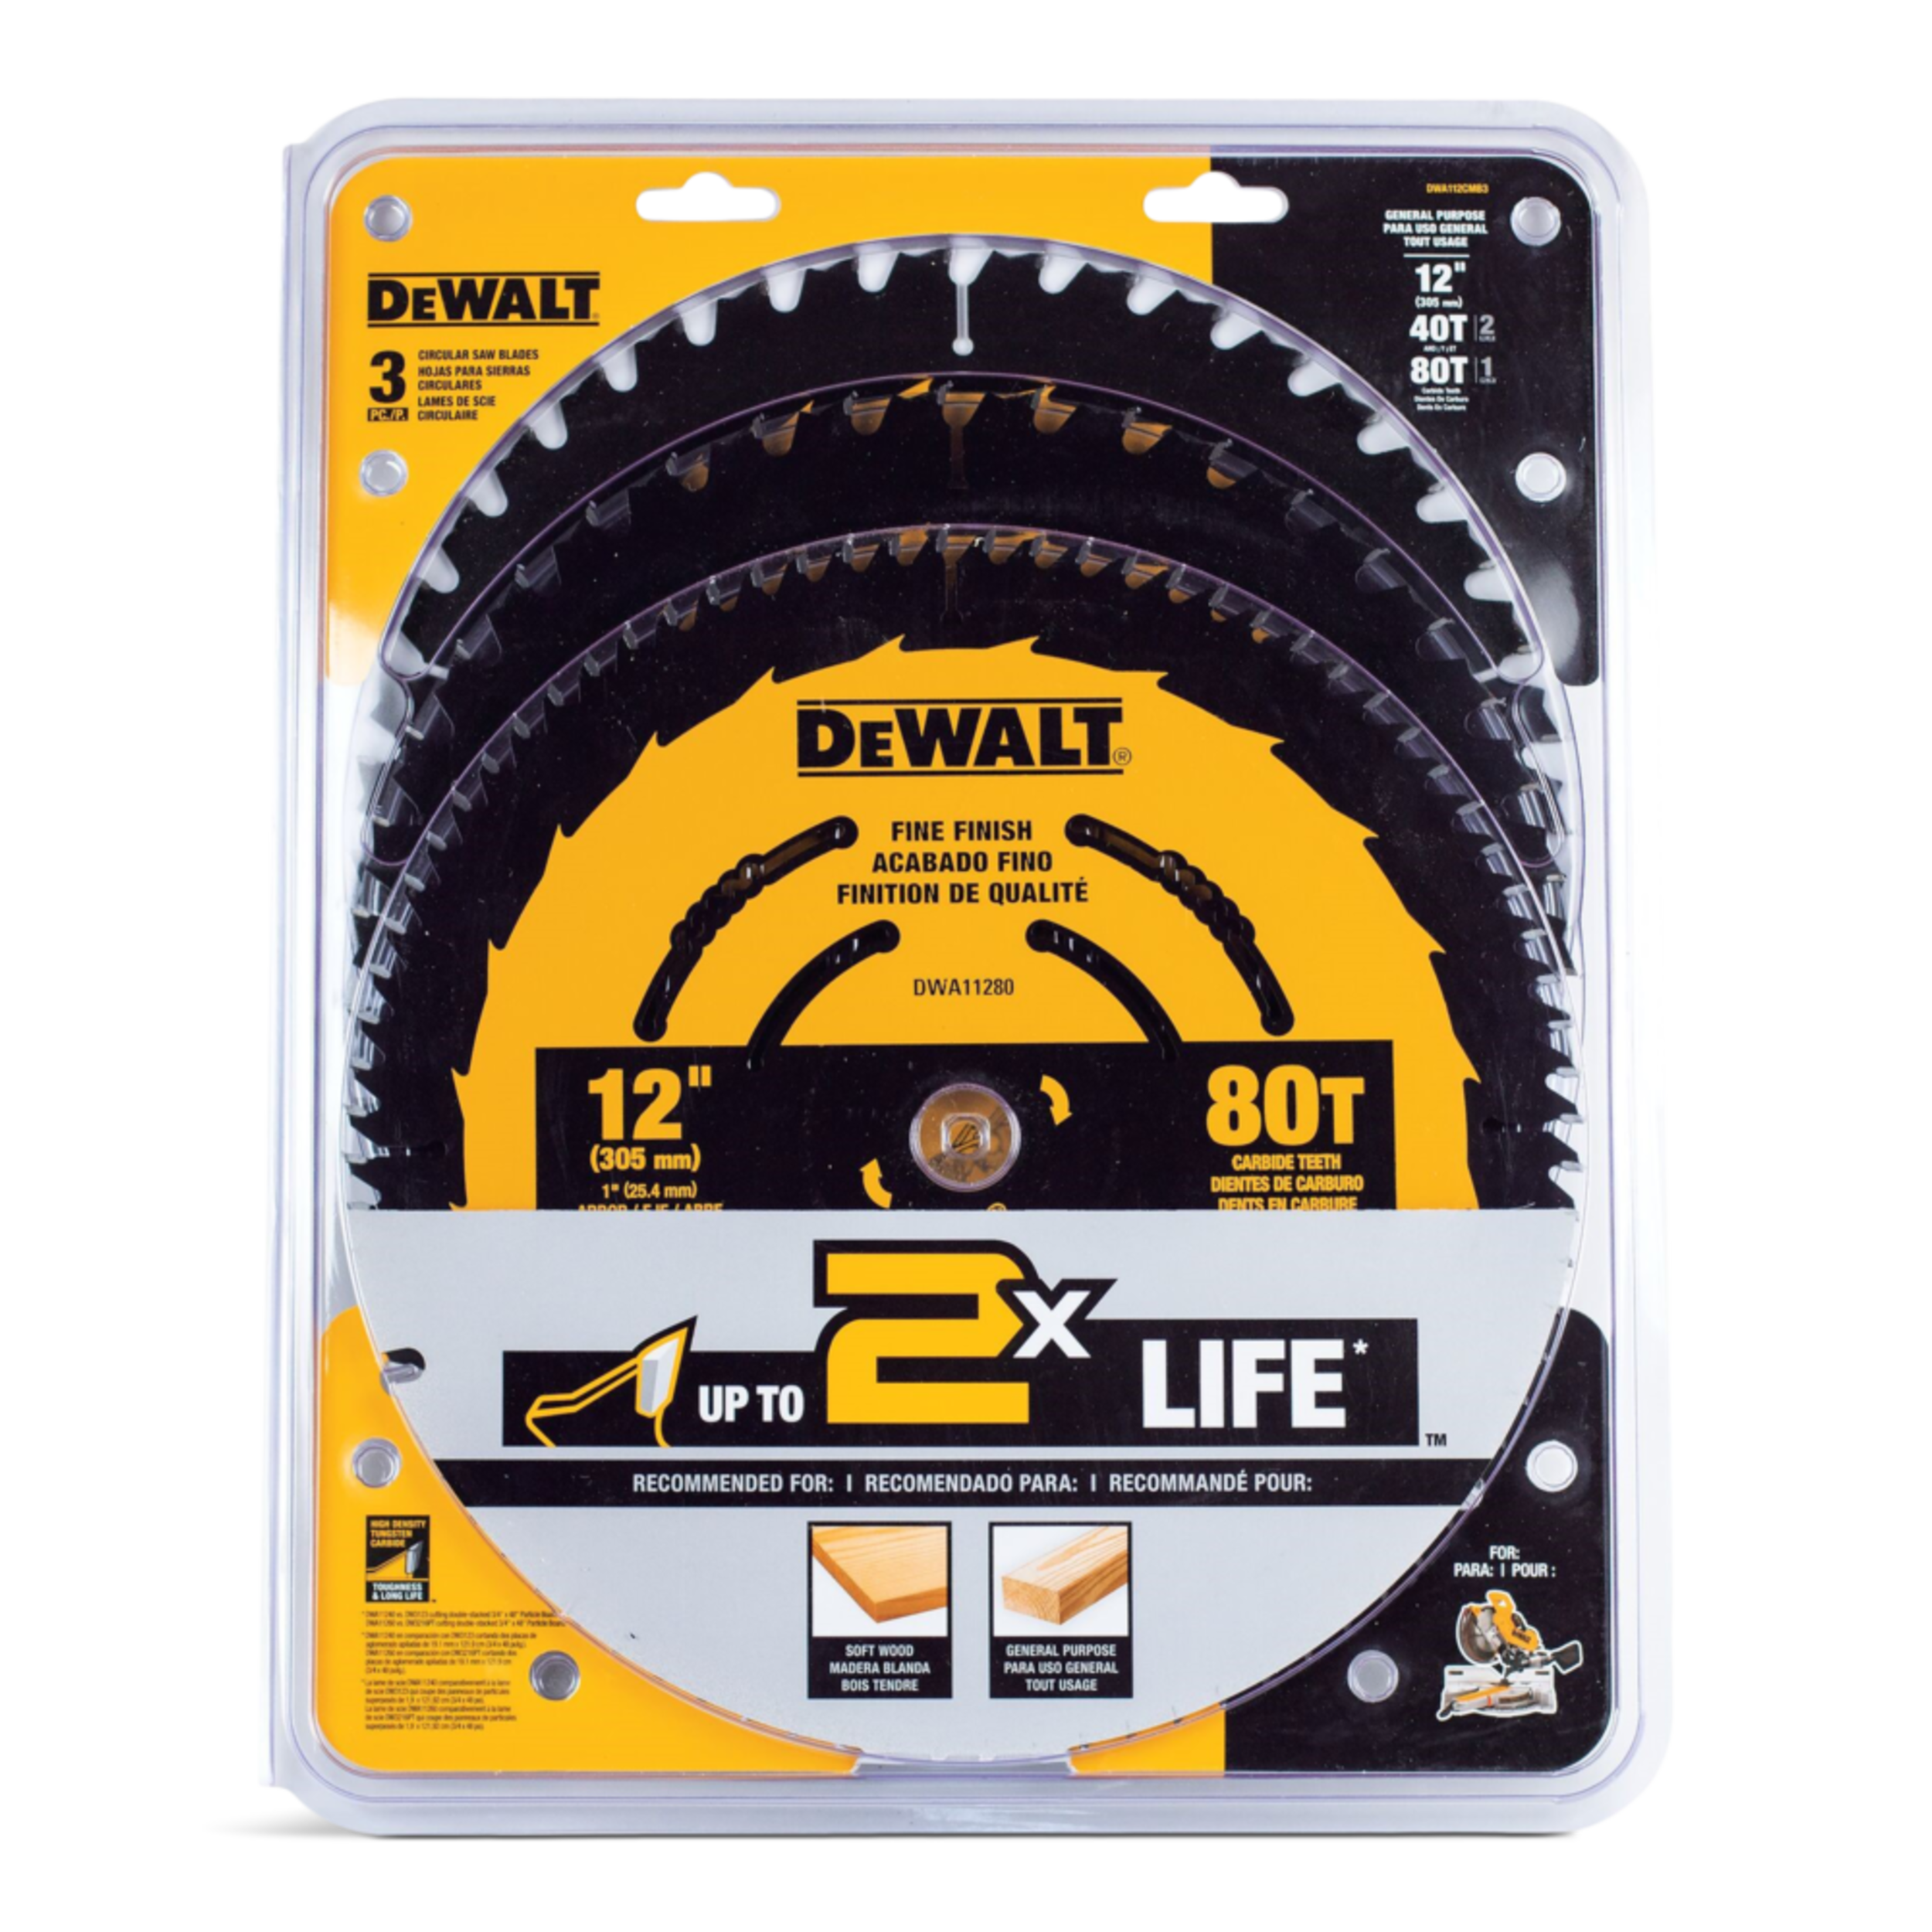 DW 2PK 12 IN 40T AND 60T SAW BLADES